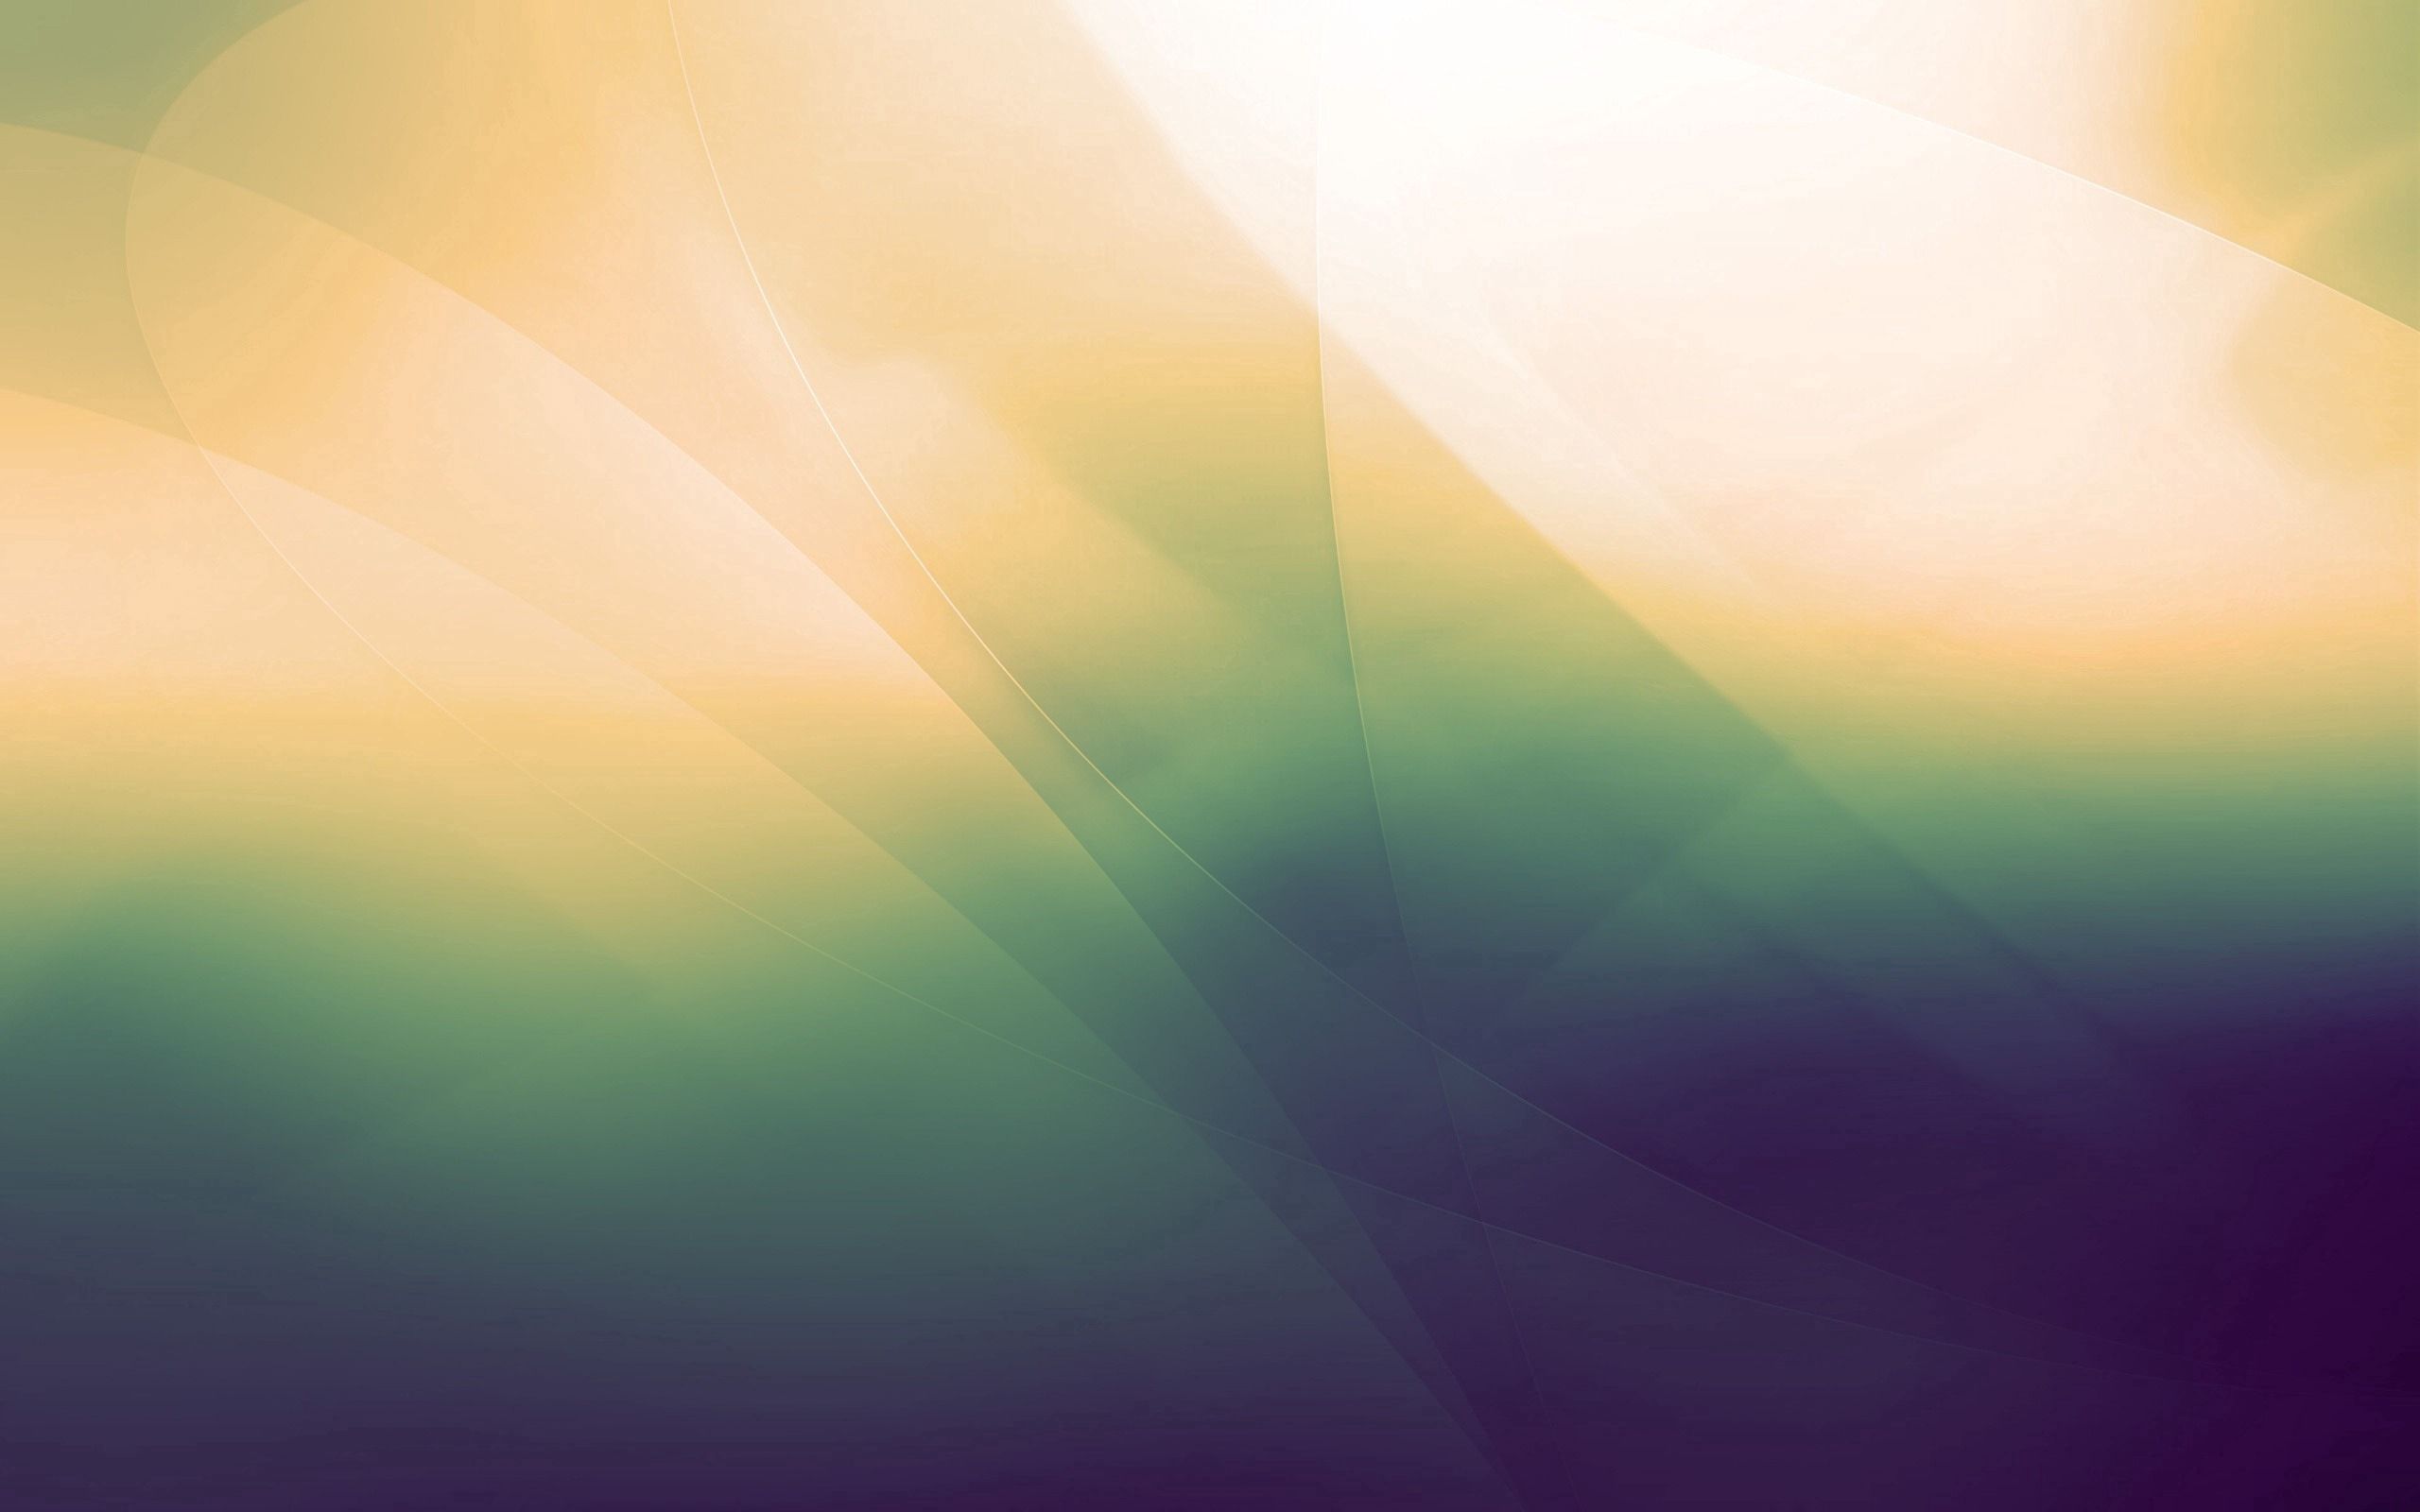 faded, abstract, shine, light, blur, smooth, paints Free Stock Photo